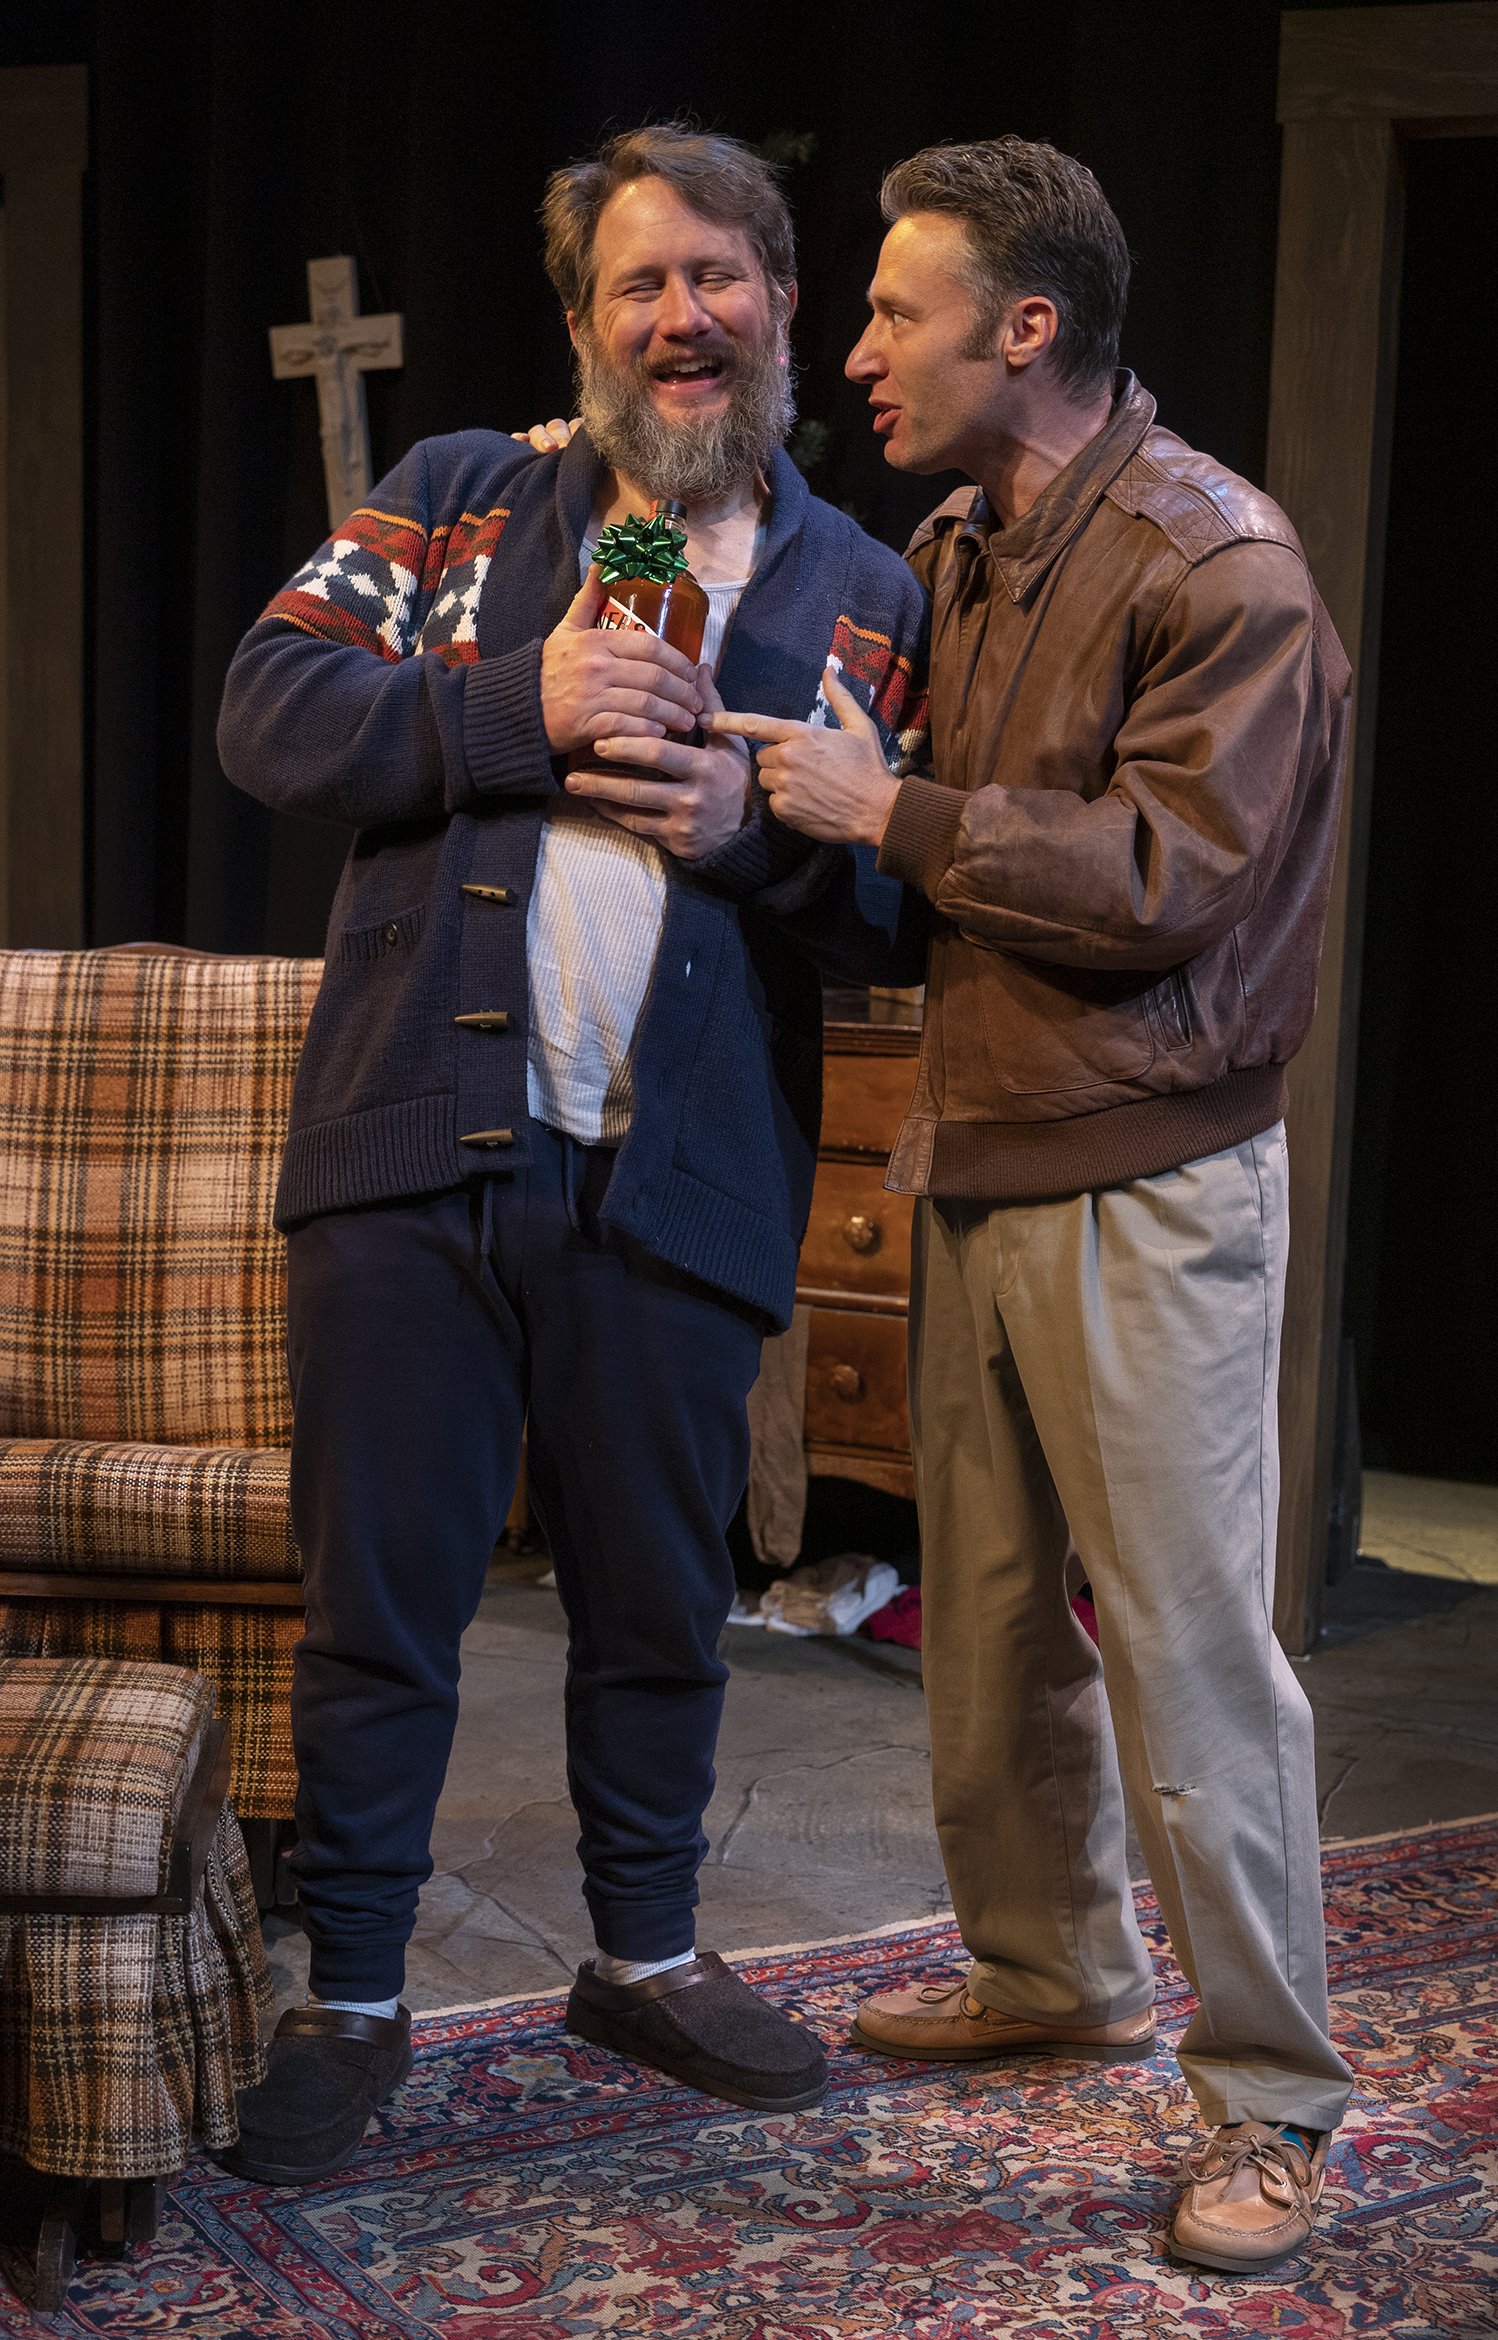 Matt Walley as Richard and Robert Anthony Peters as Nicky. Photo by Tim Fuller.